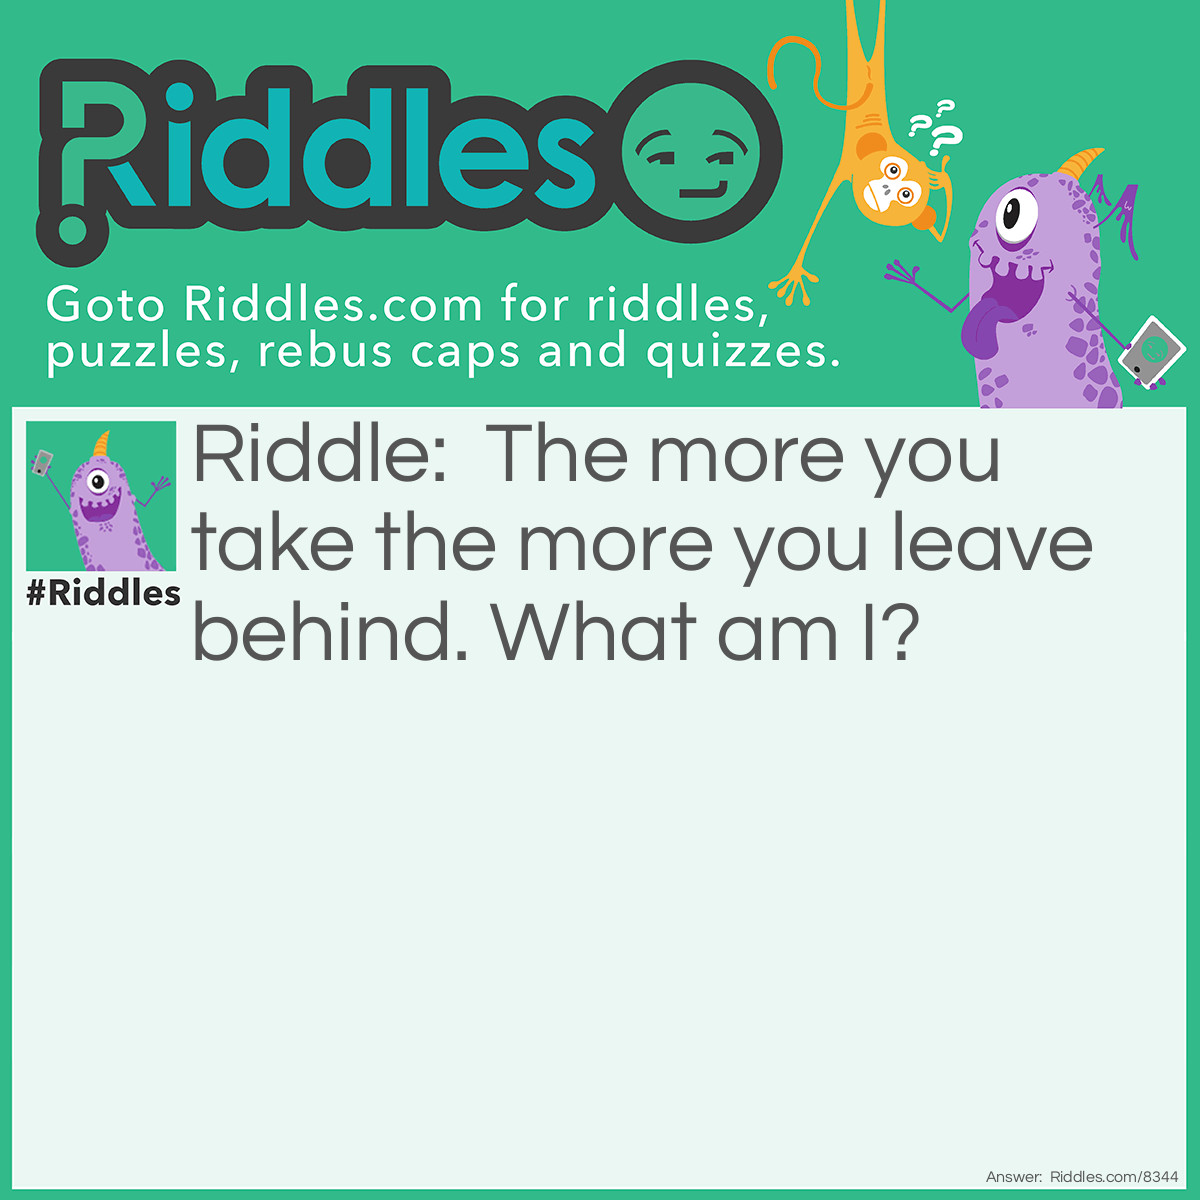 Riddle: The more you take the more you leave behind. What am I? Answer: Steps.